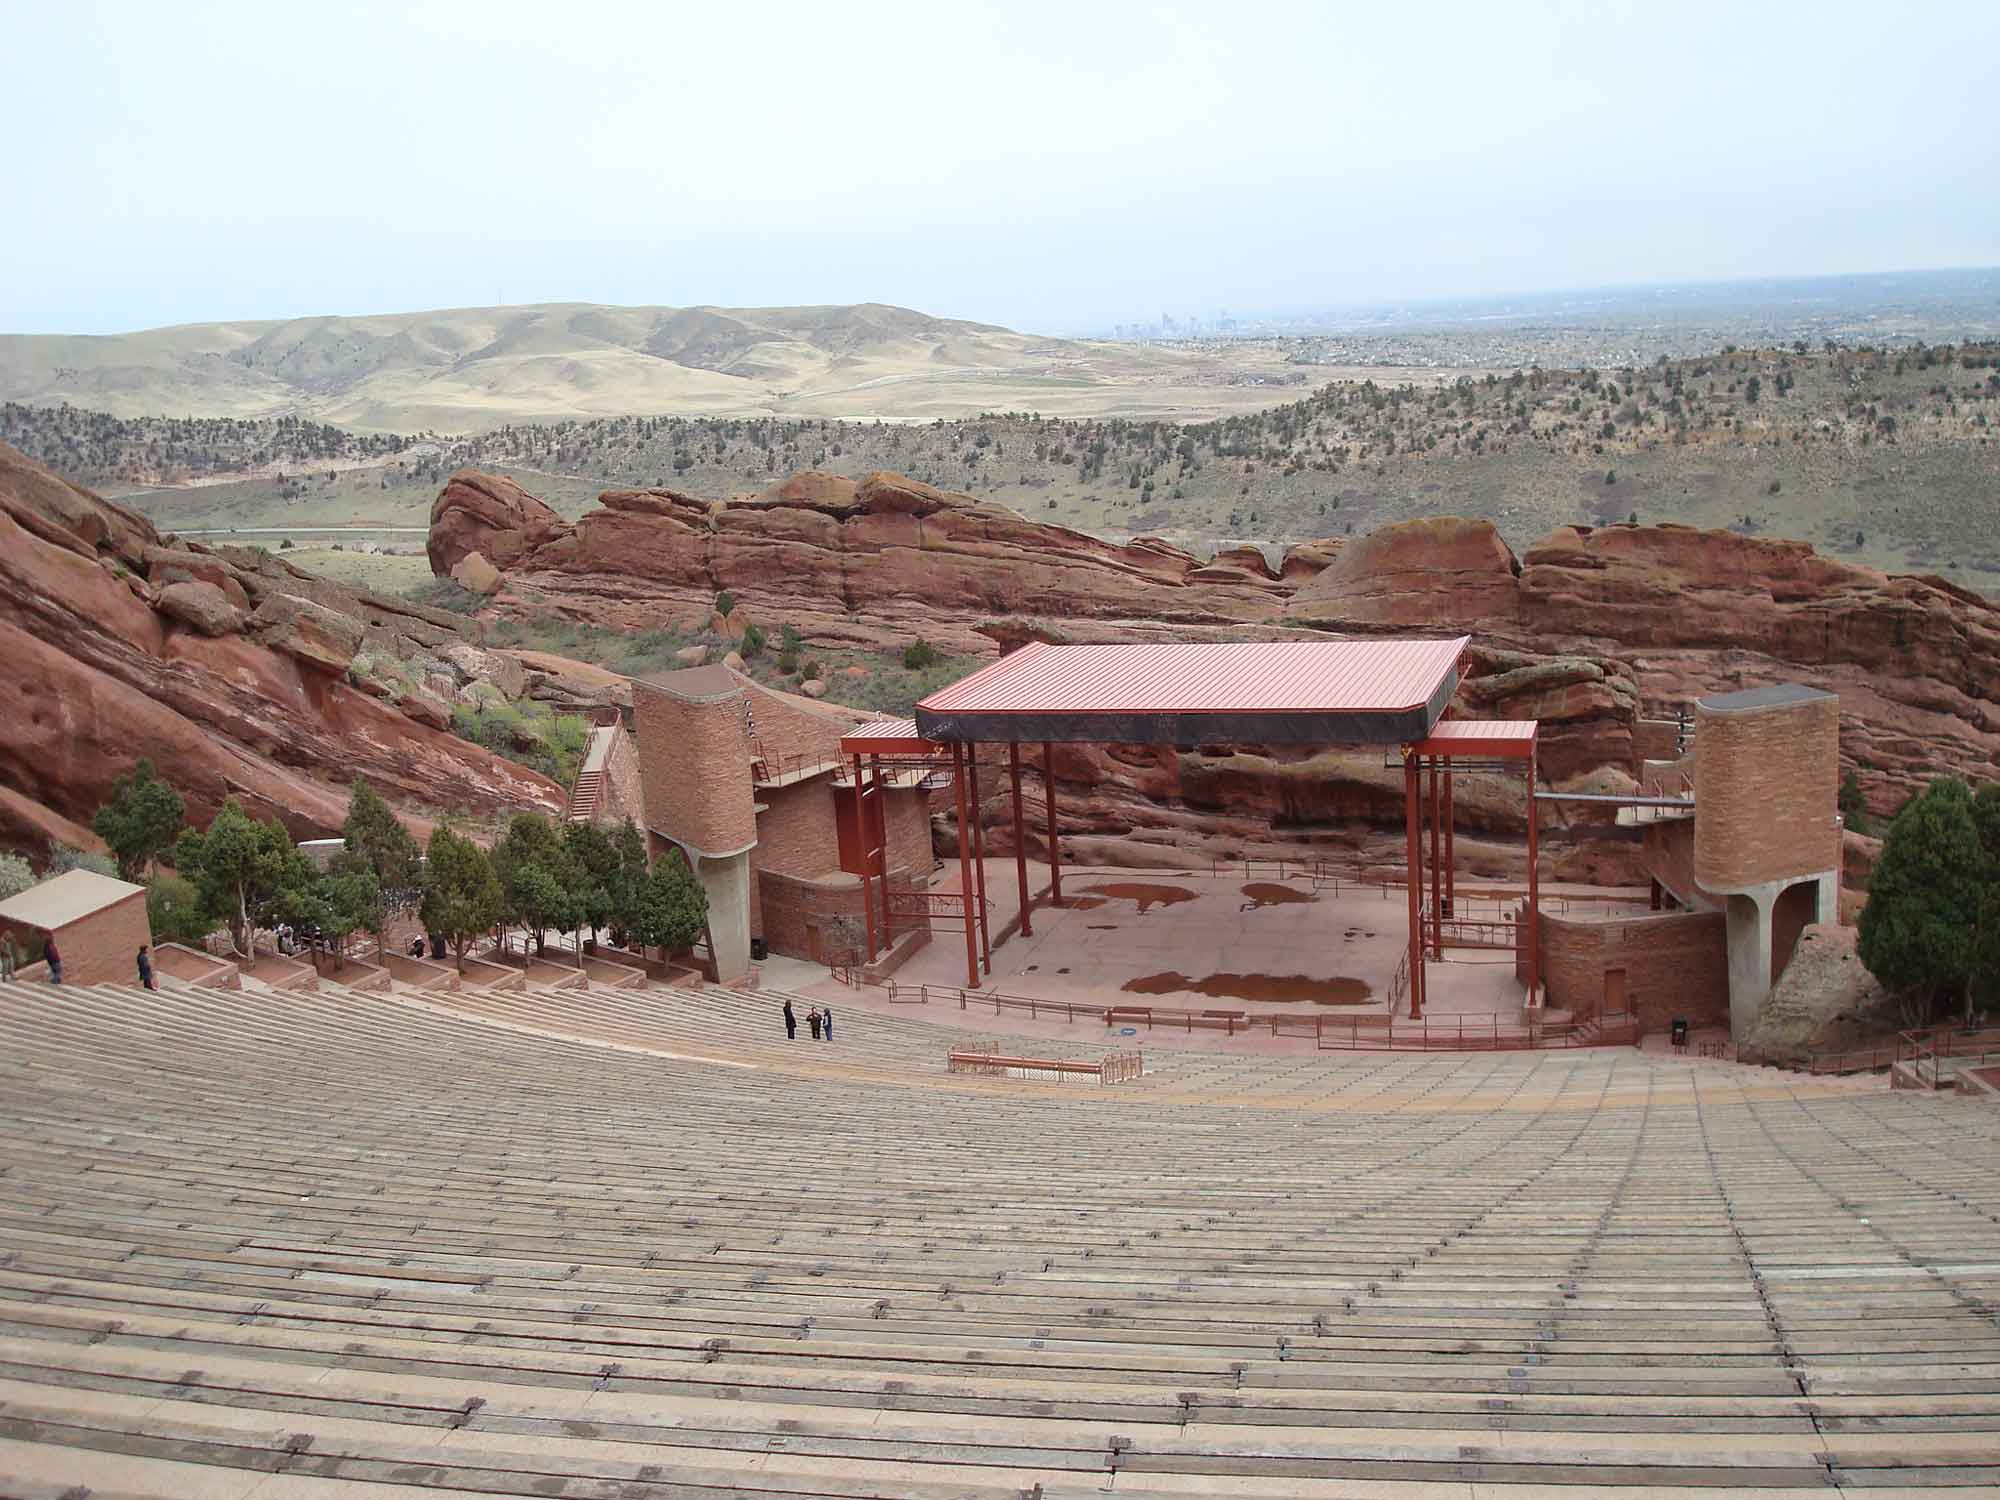 Photograph of the Red Rocks Park music venue in Colorado.